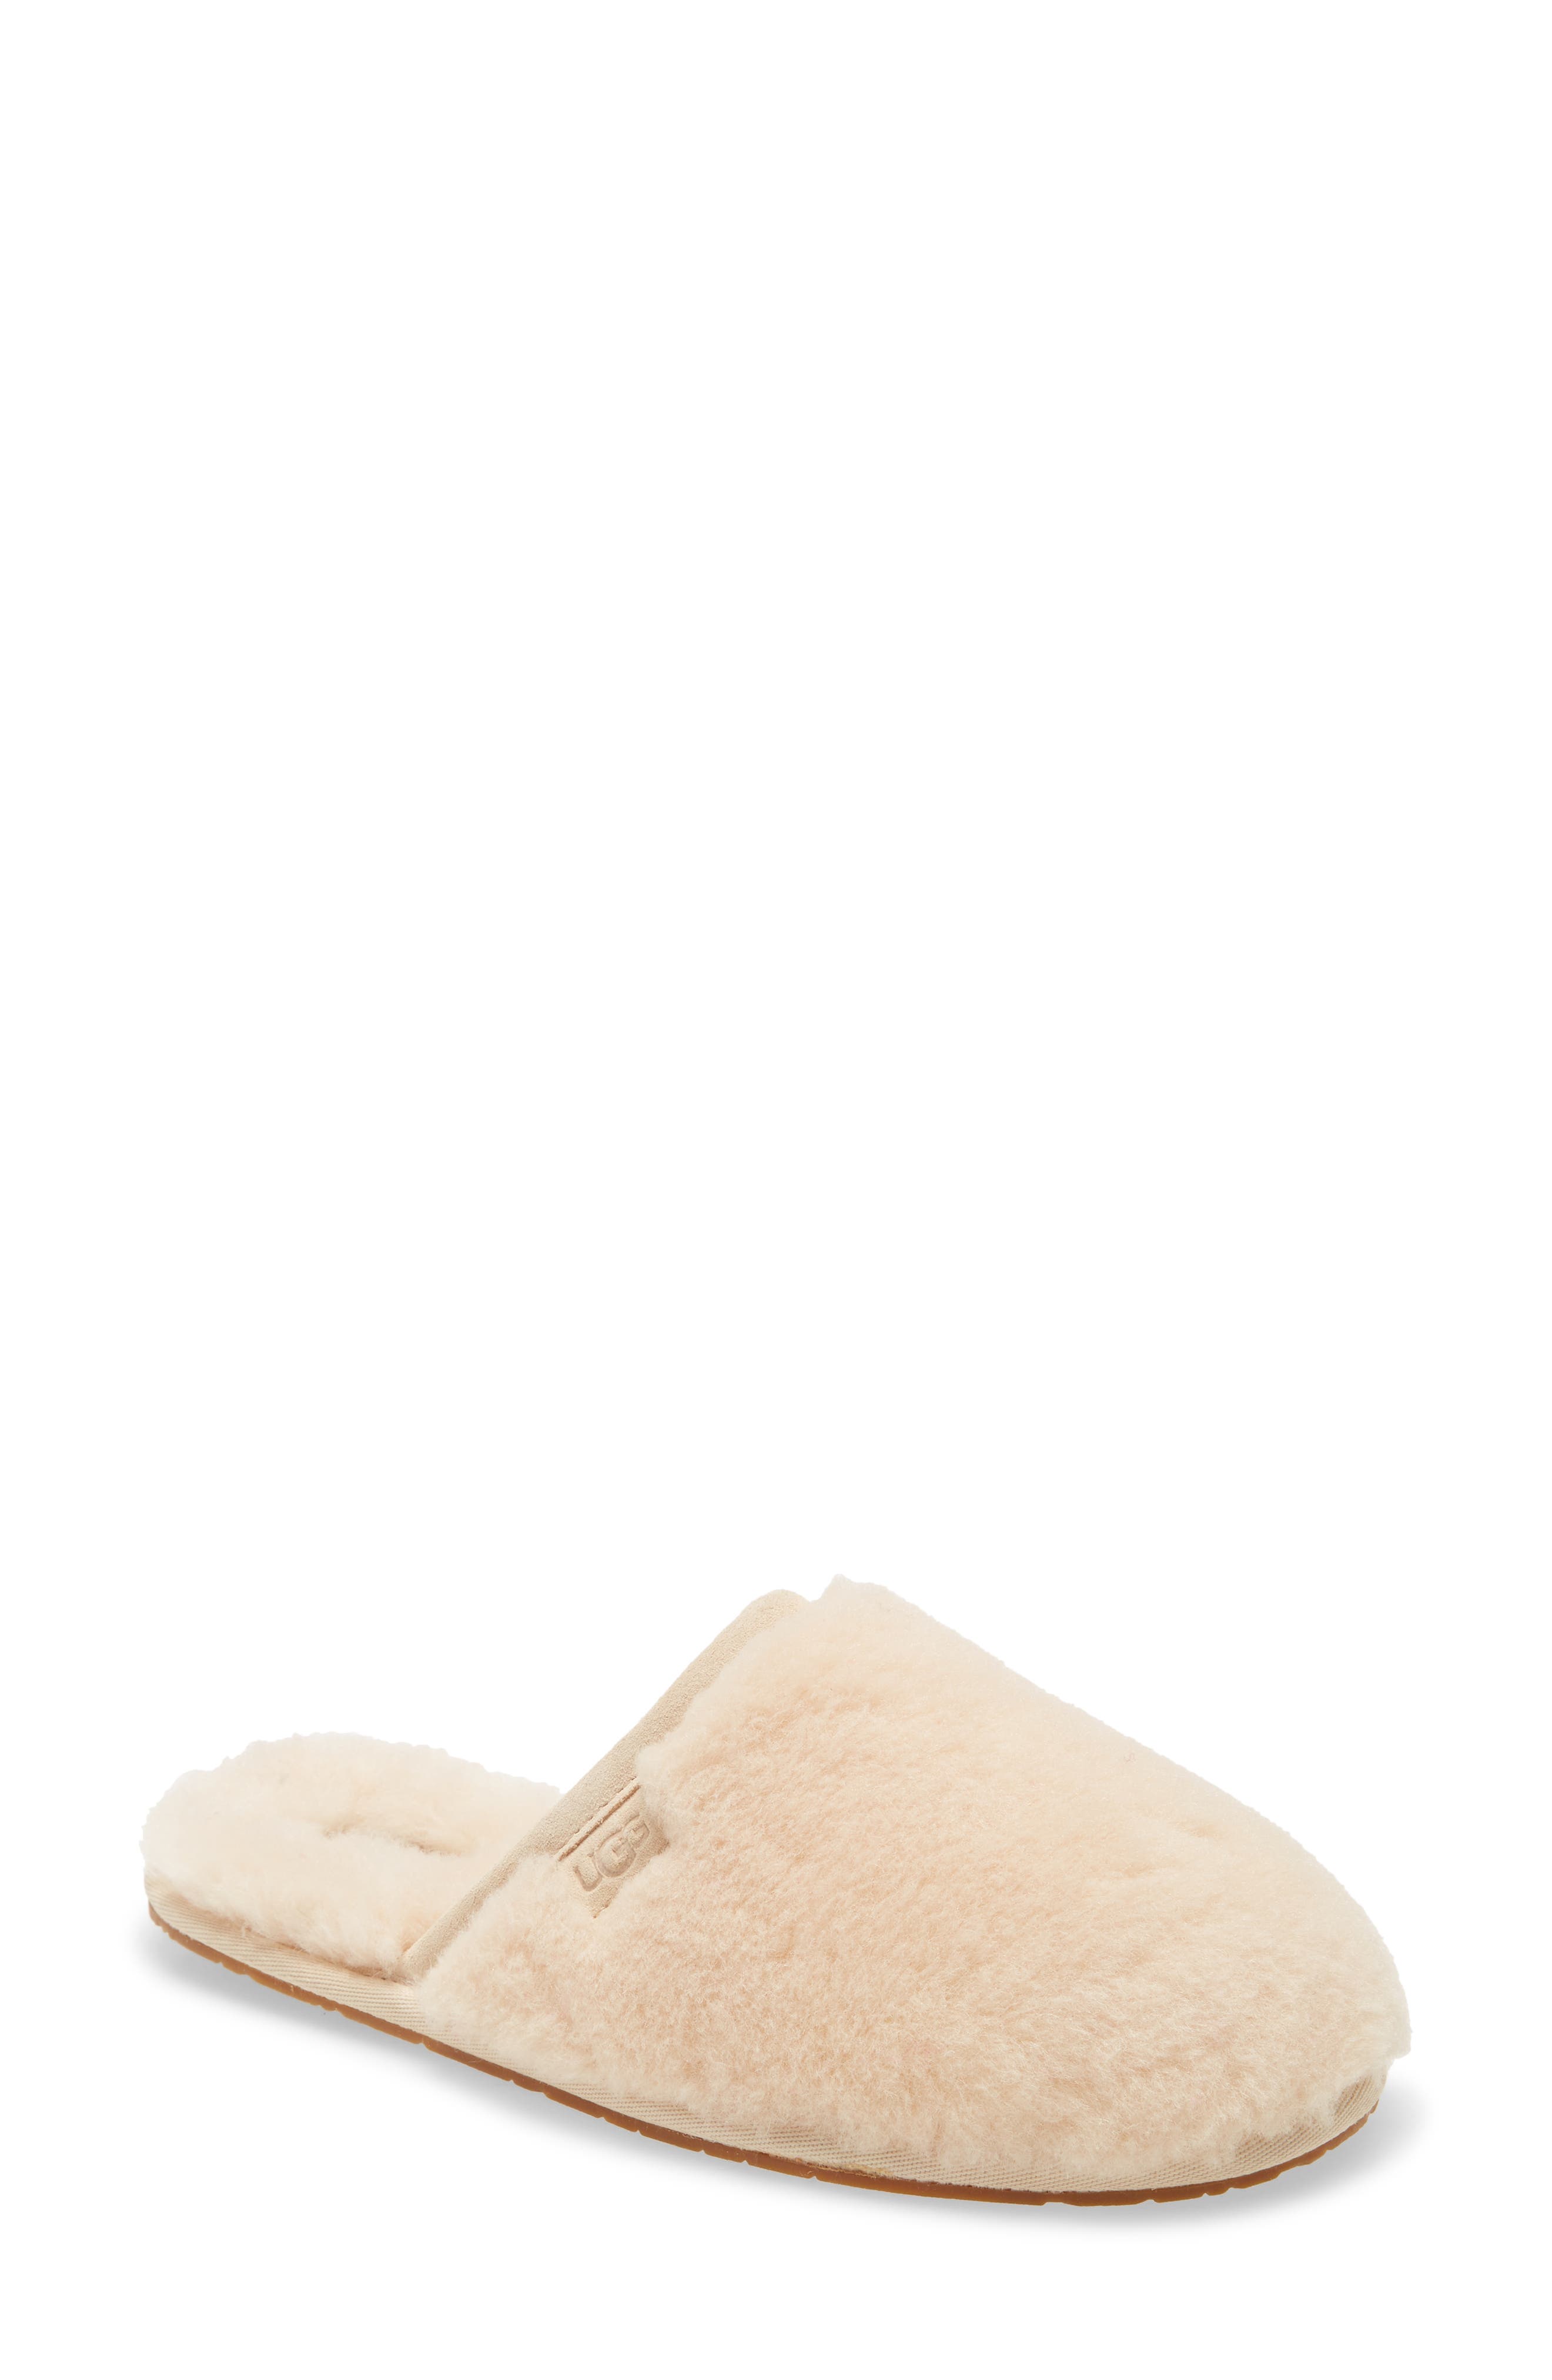 ugg slippers womens sale